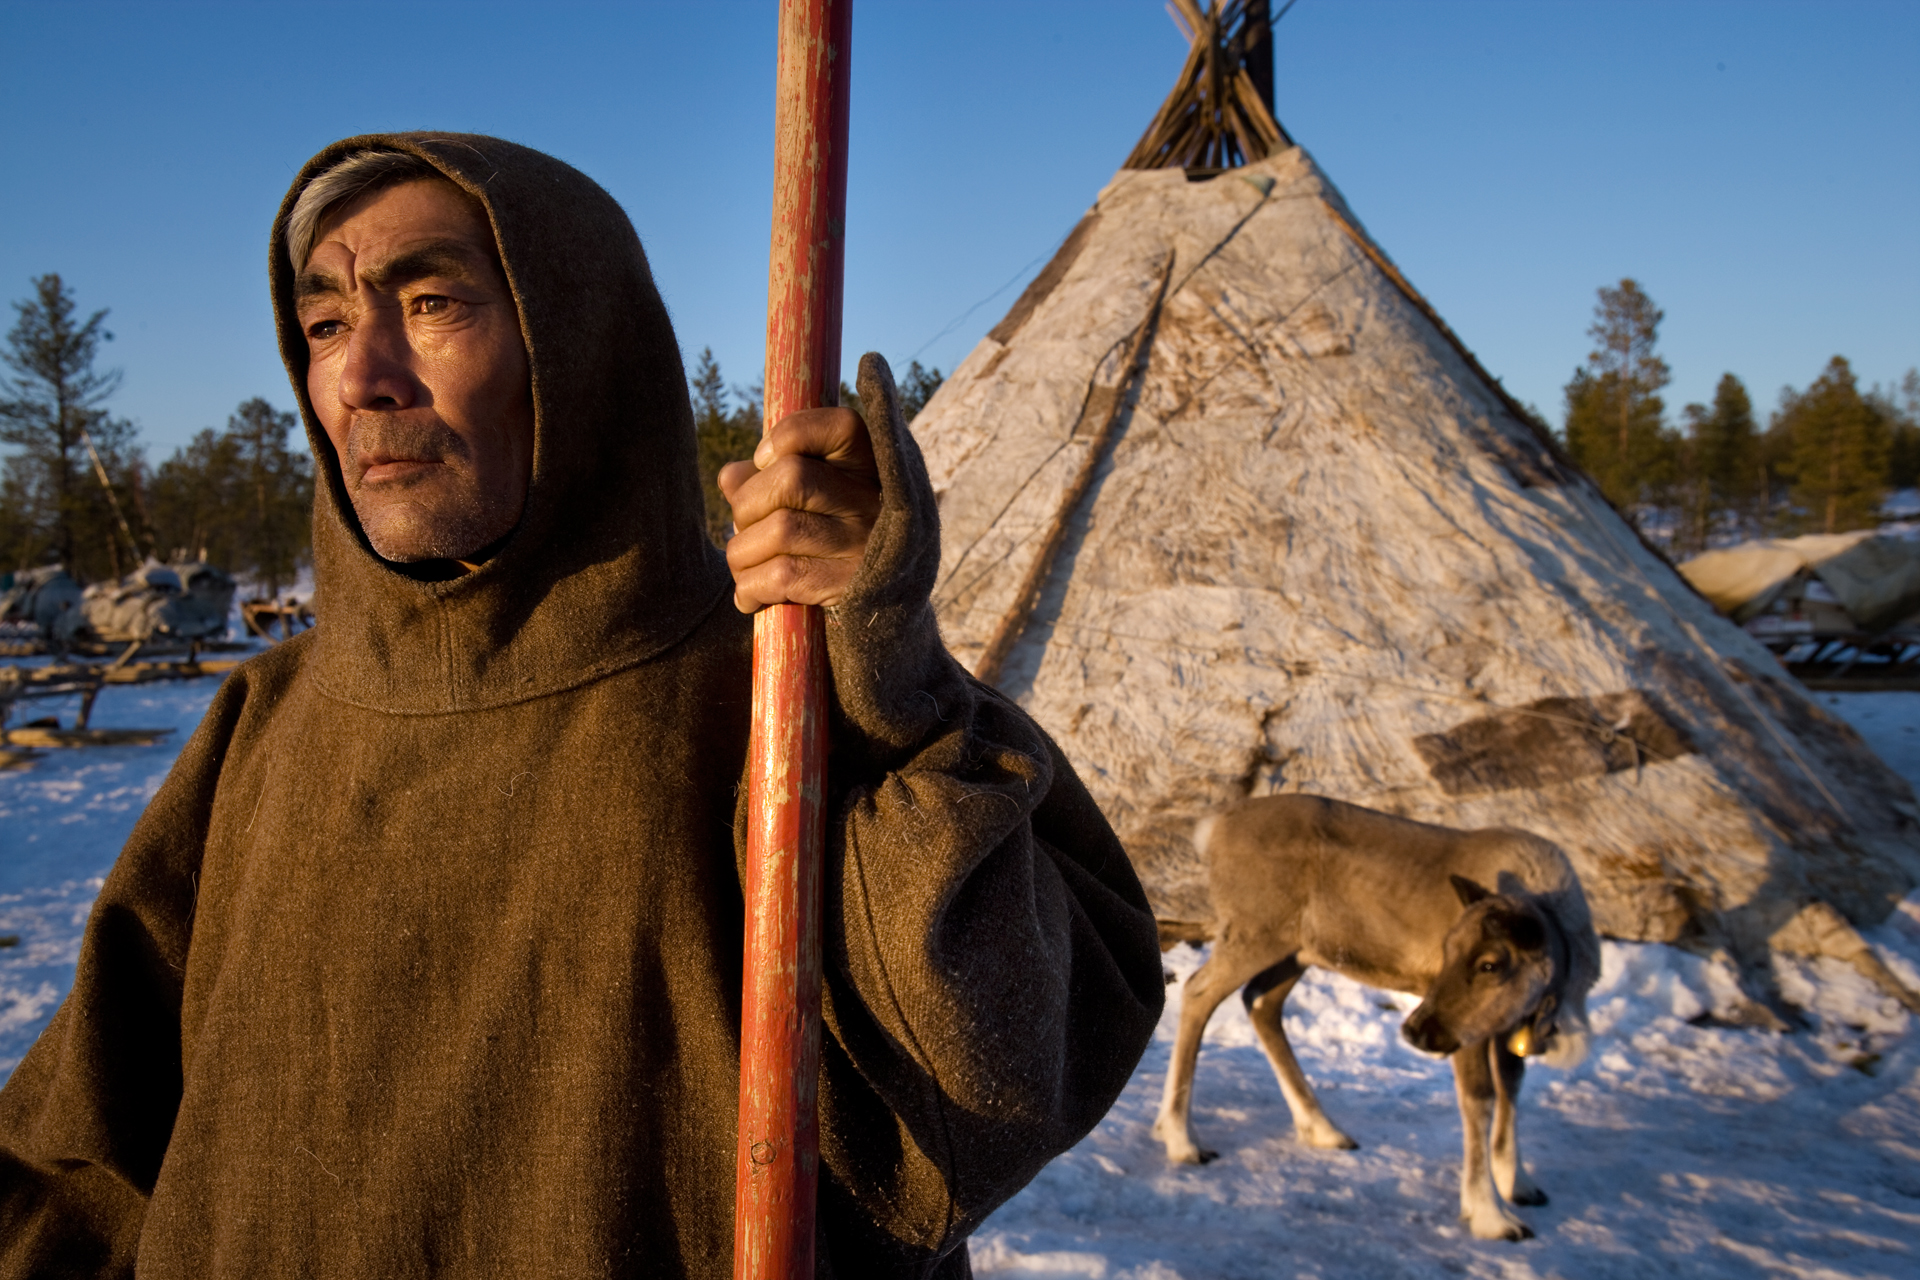  Nenets herder, Alexander Turgachev, in front of his brigade’s chum - a traditional dwelling (yurt) made of reindeer skins.  Near Saranpaul, Russia  